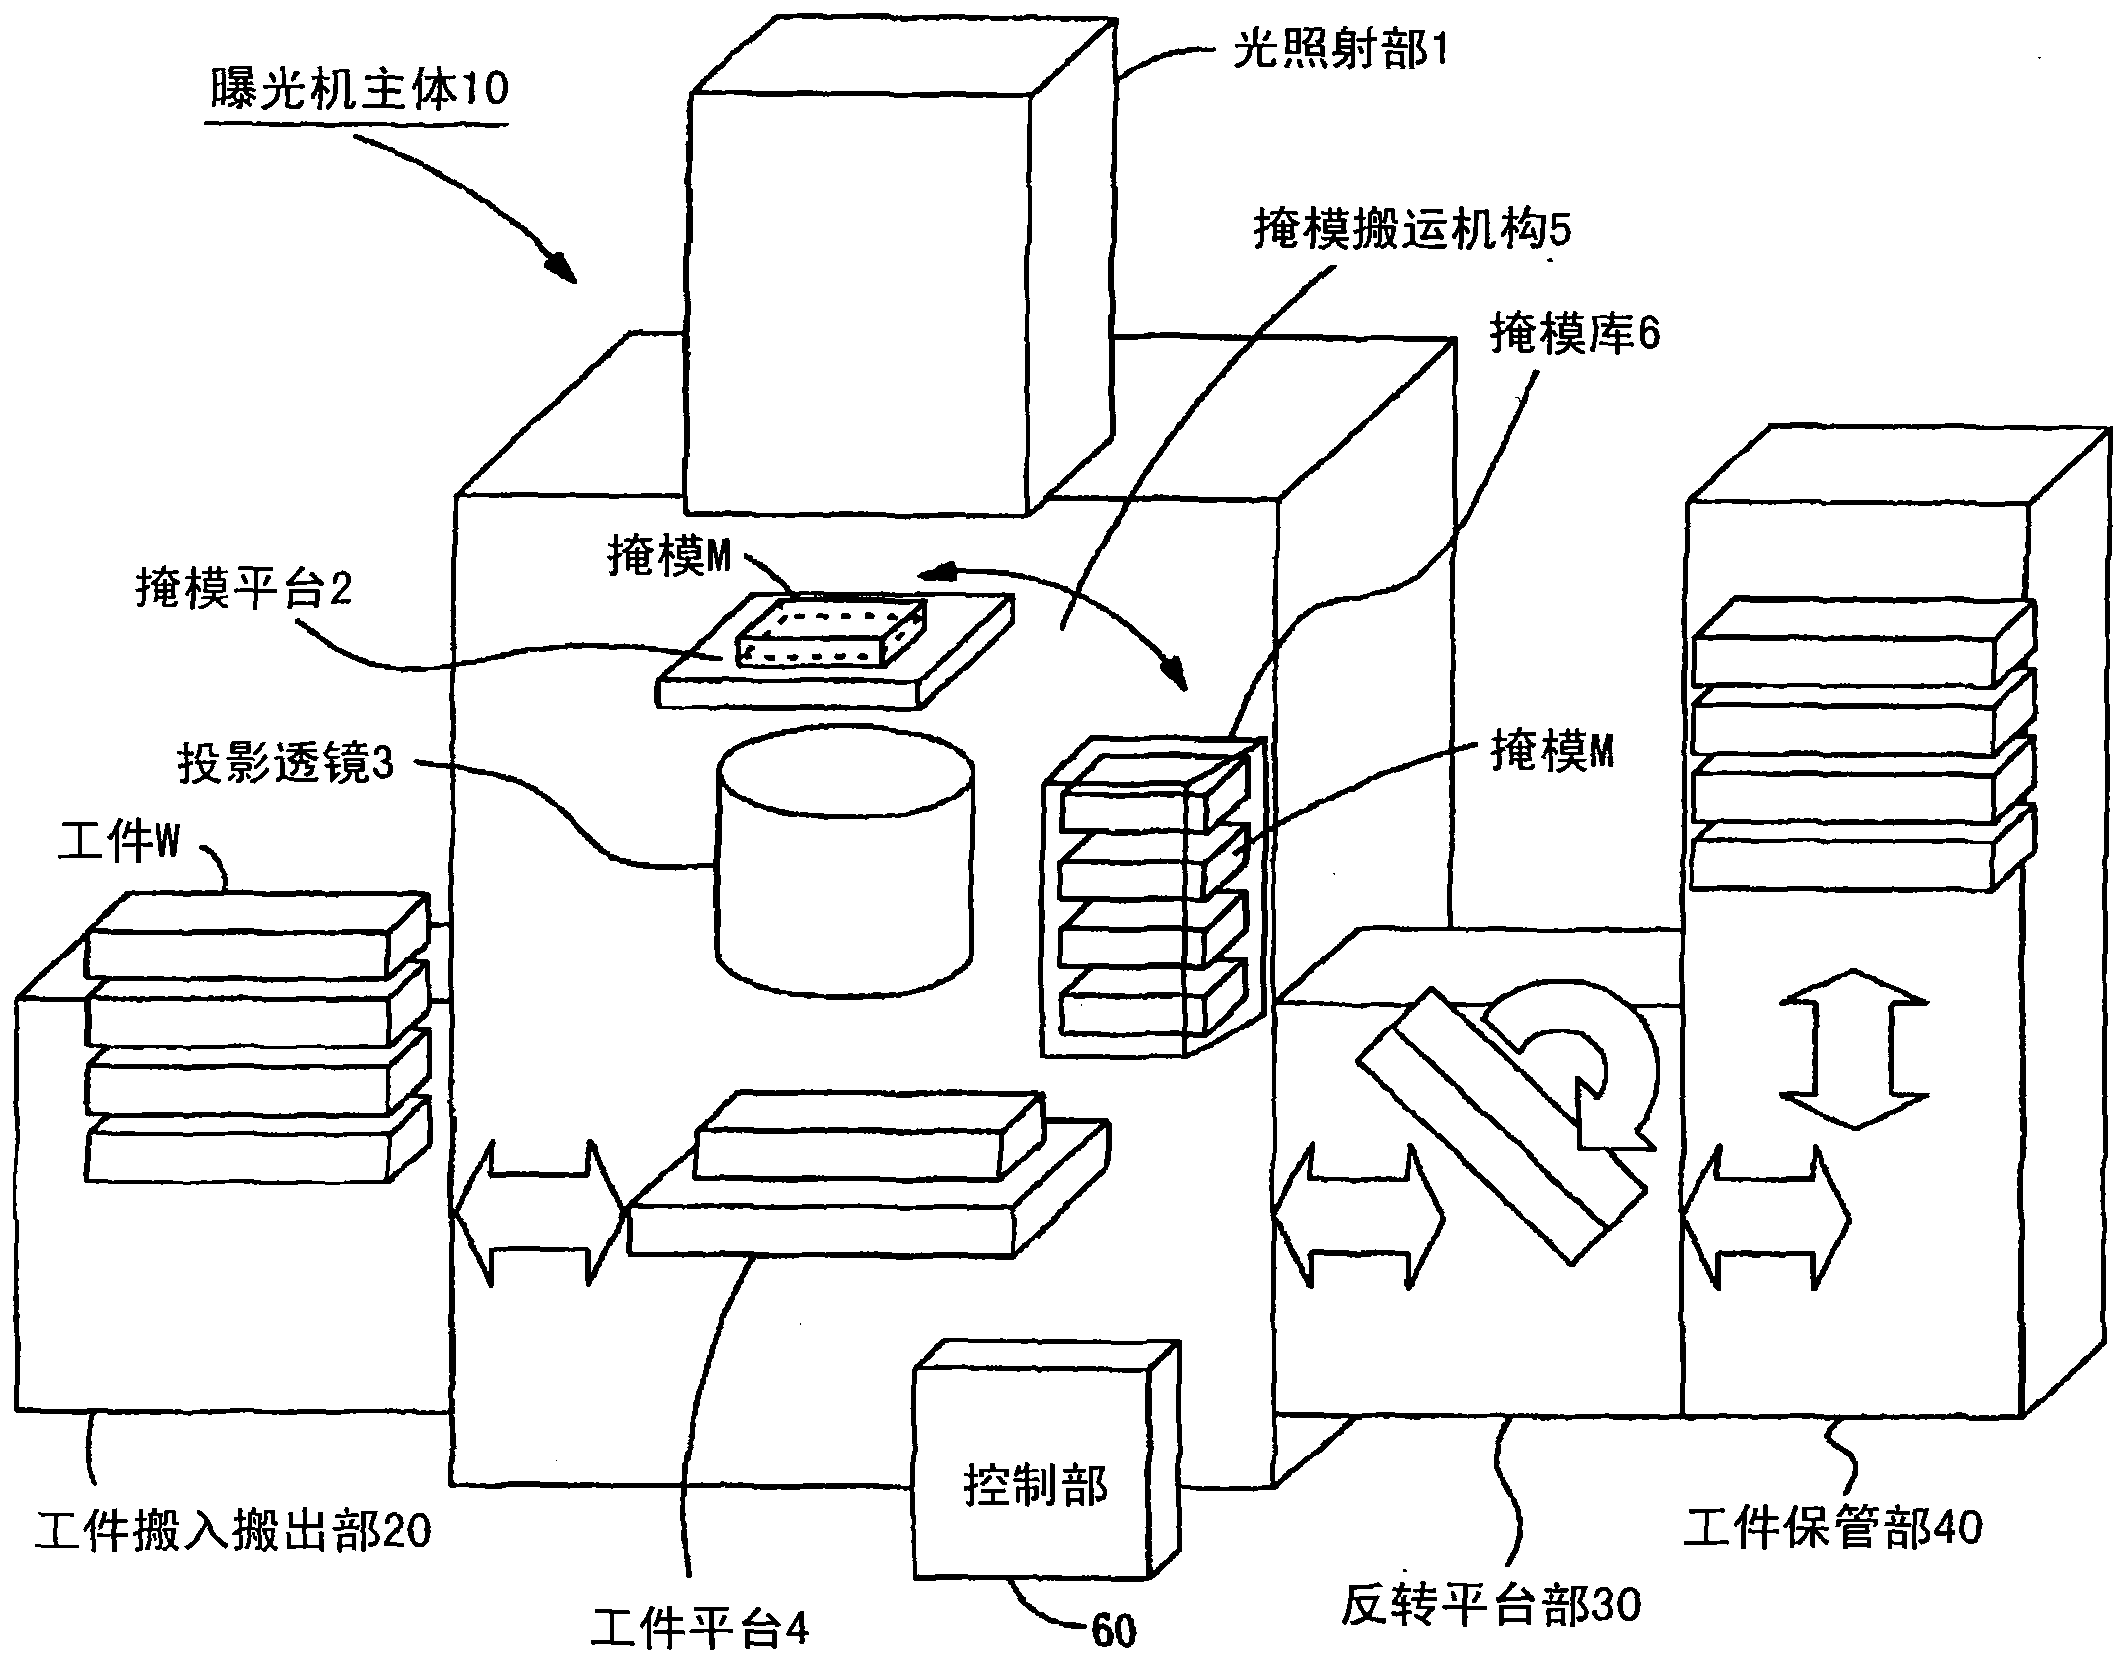 Two-side exposure device